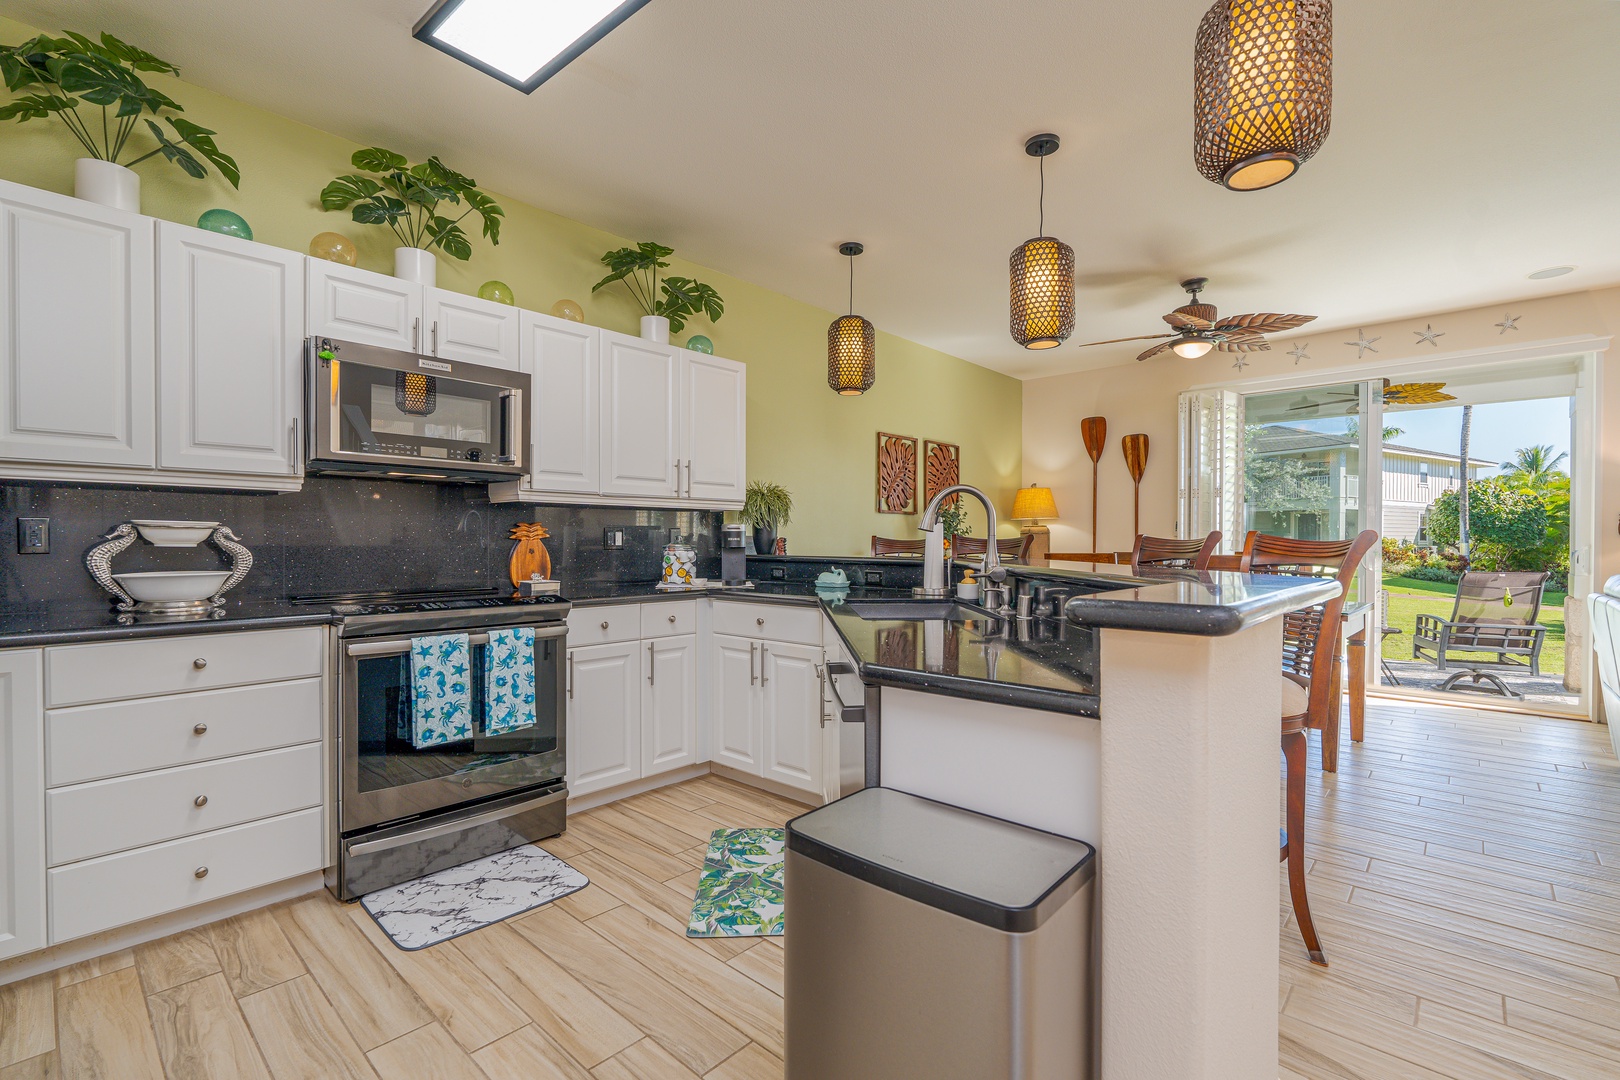 Kapolei Vacation Rentals, Ko Olina Kai 1097C - Fully-stocked and spacious kitchen area with wide counter space.